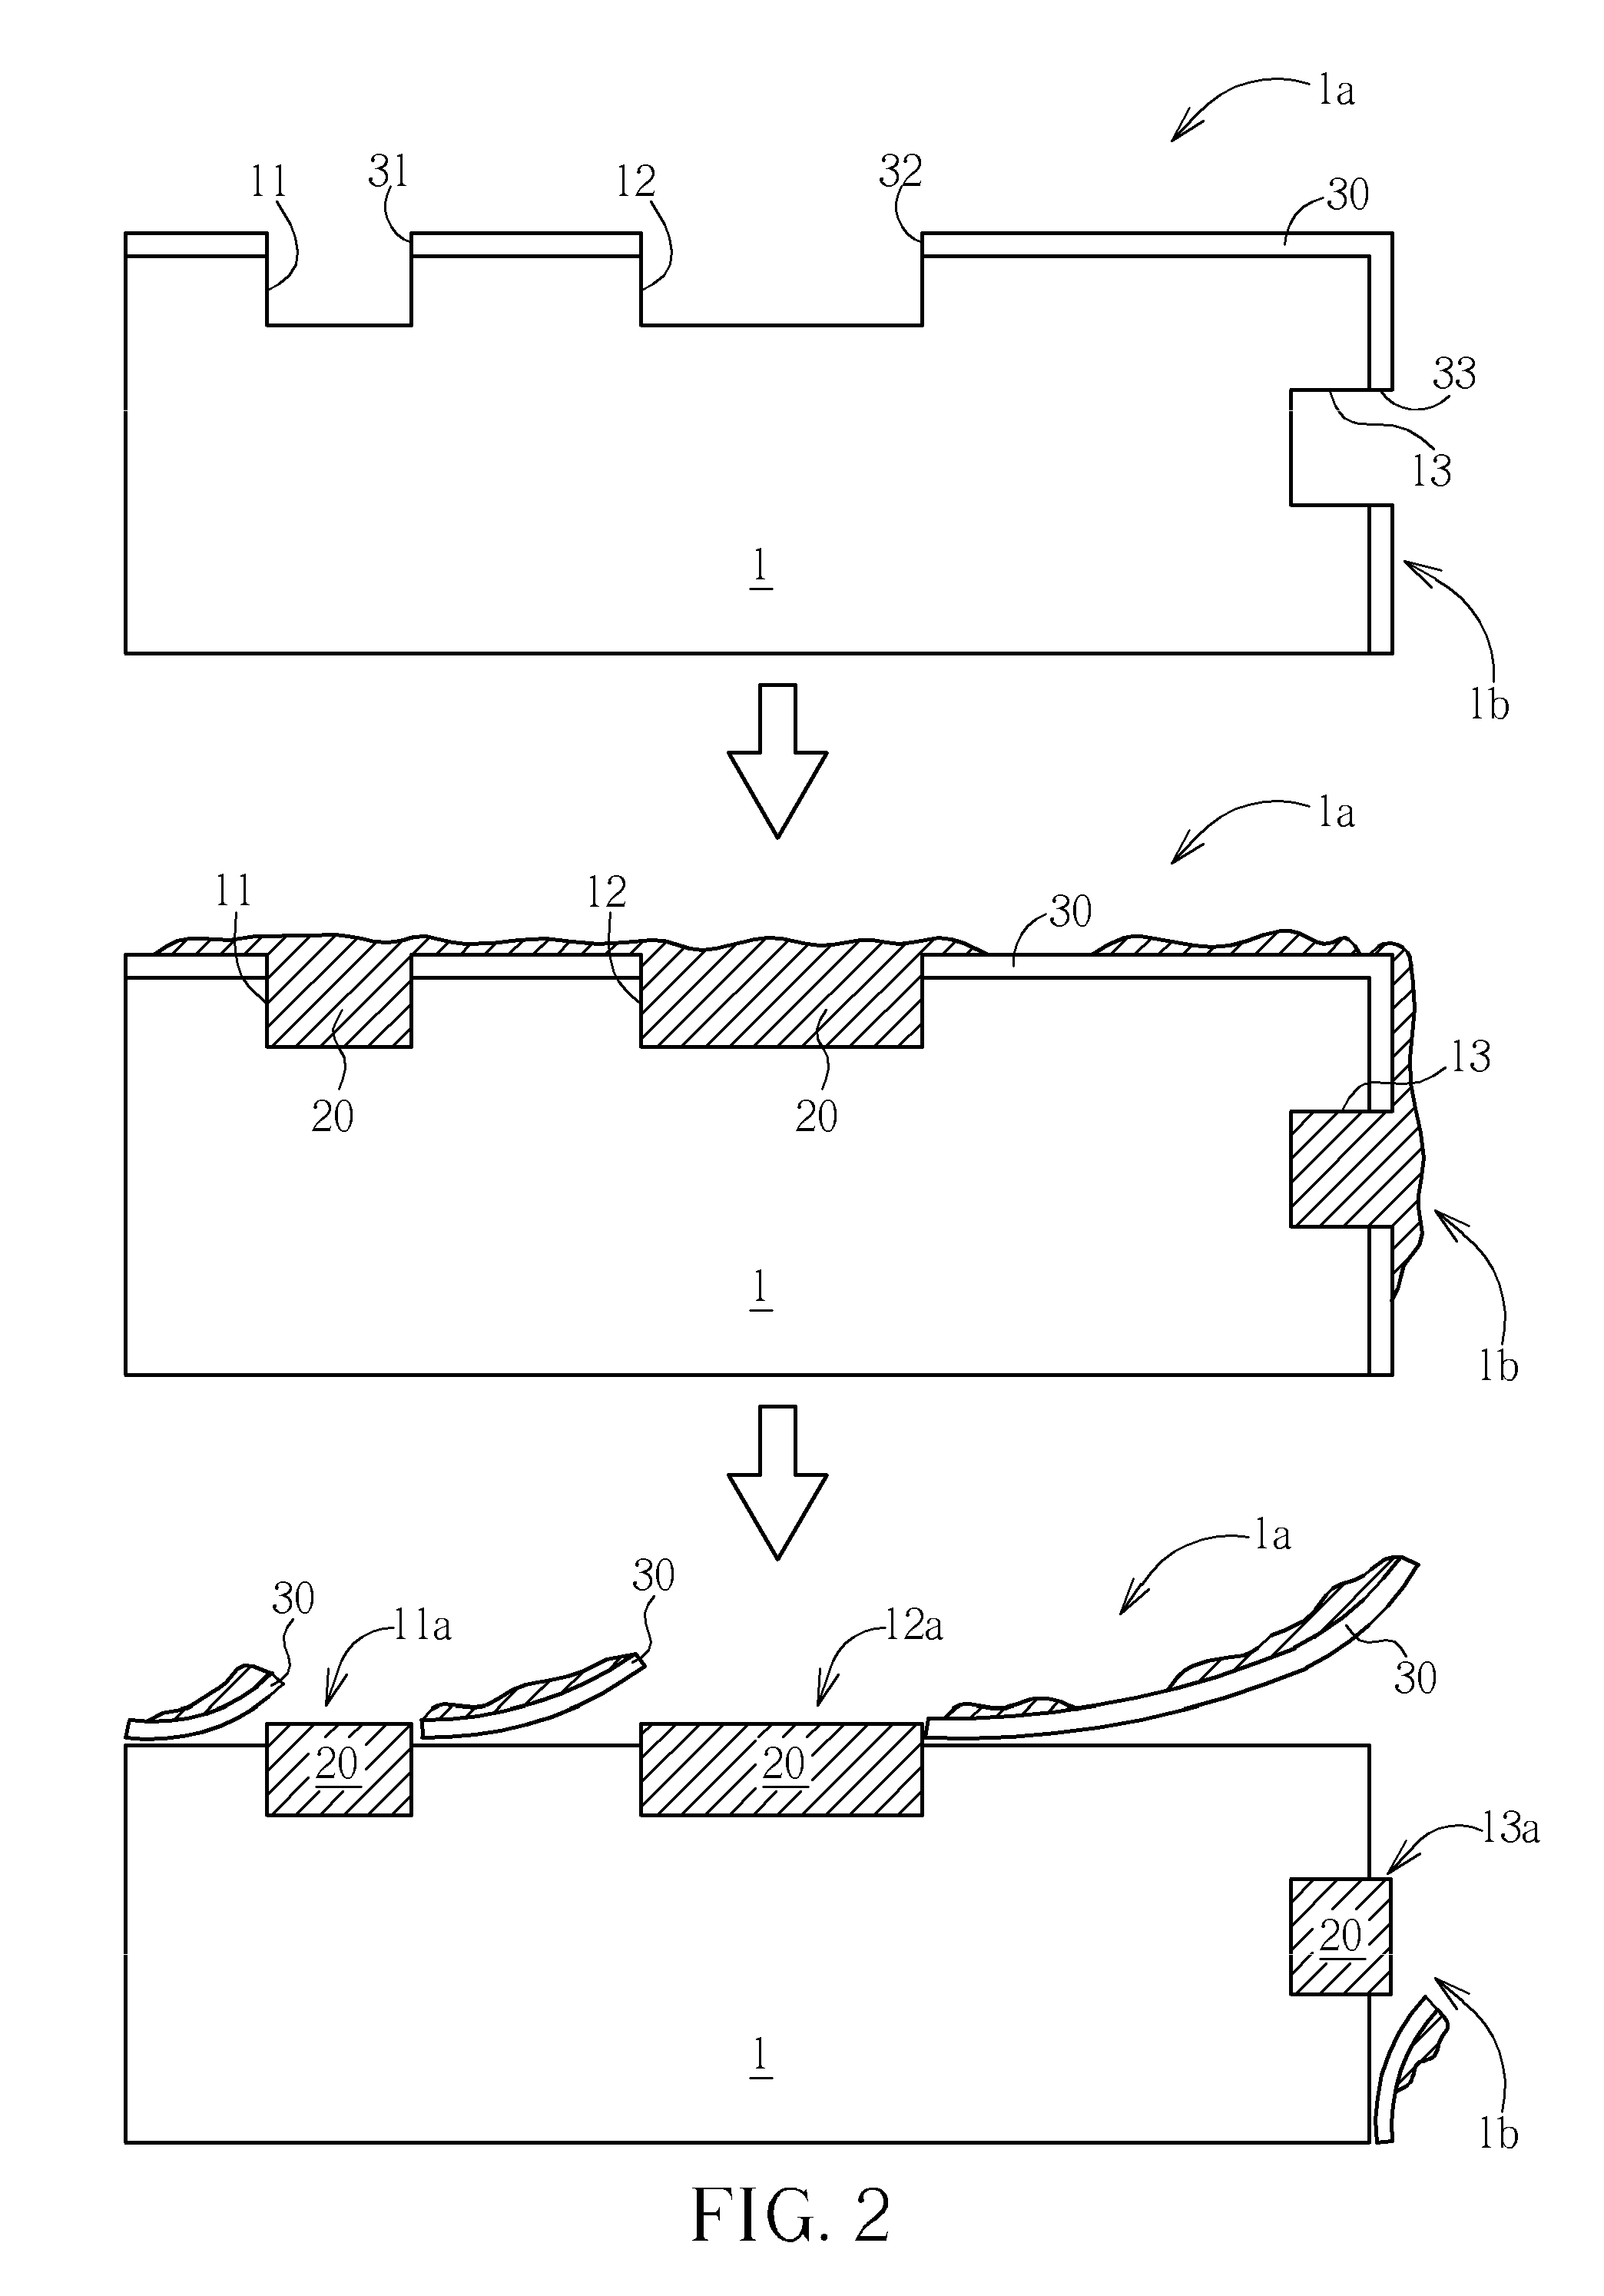 Method of making a molded interconnect device